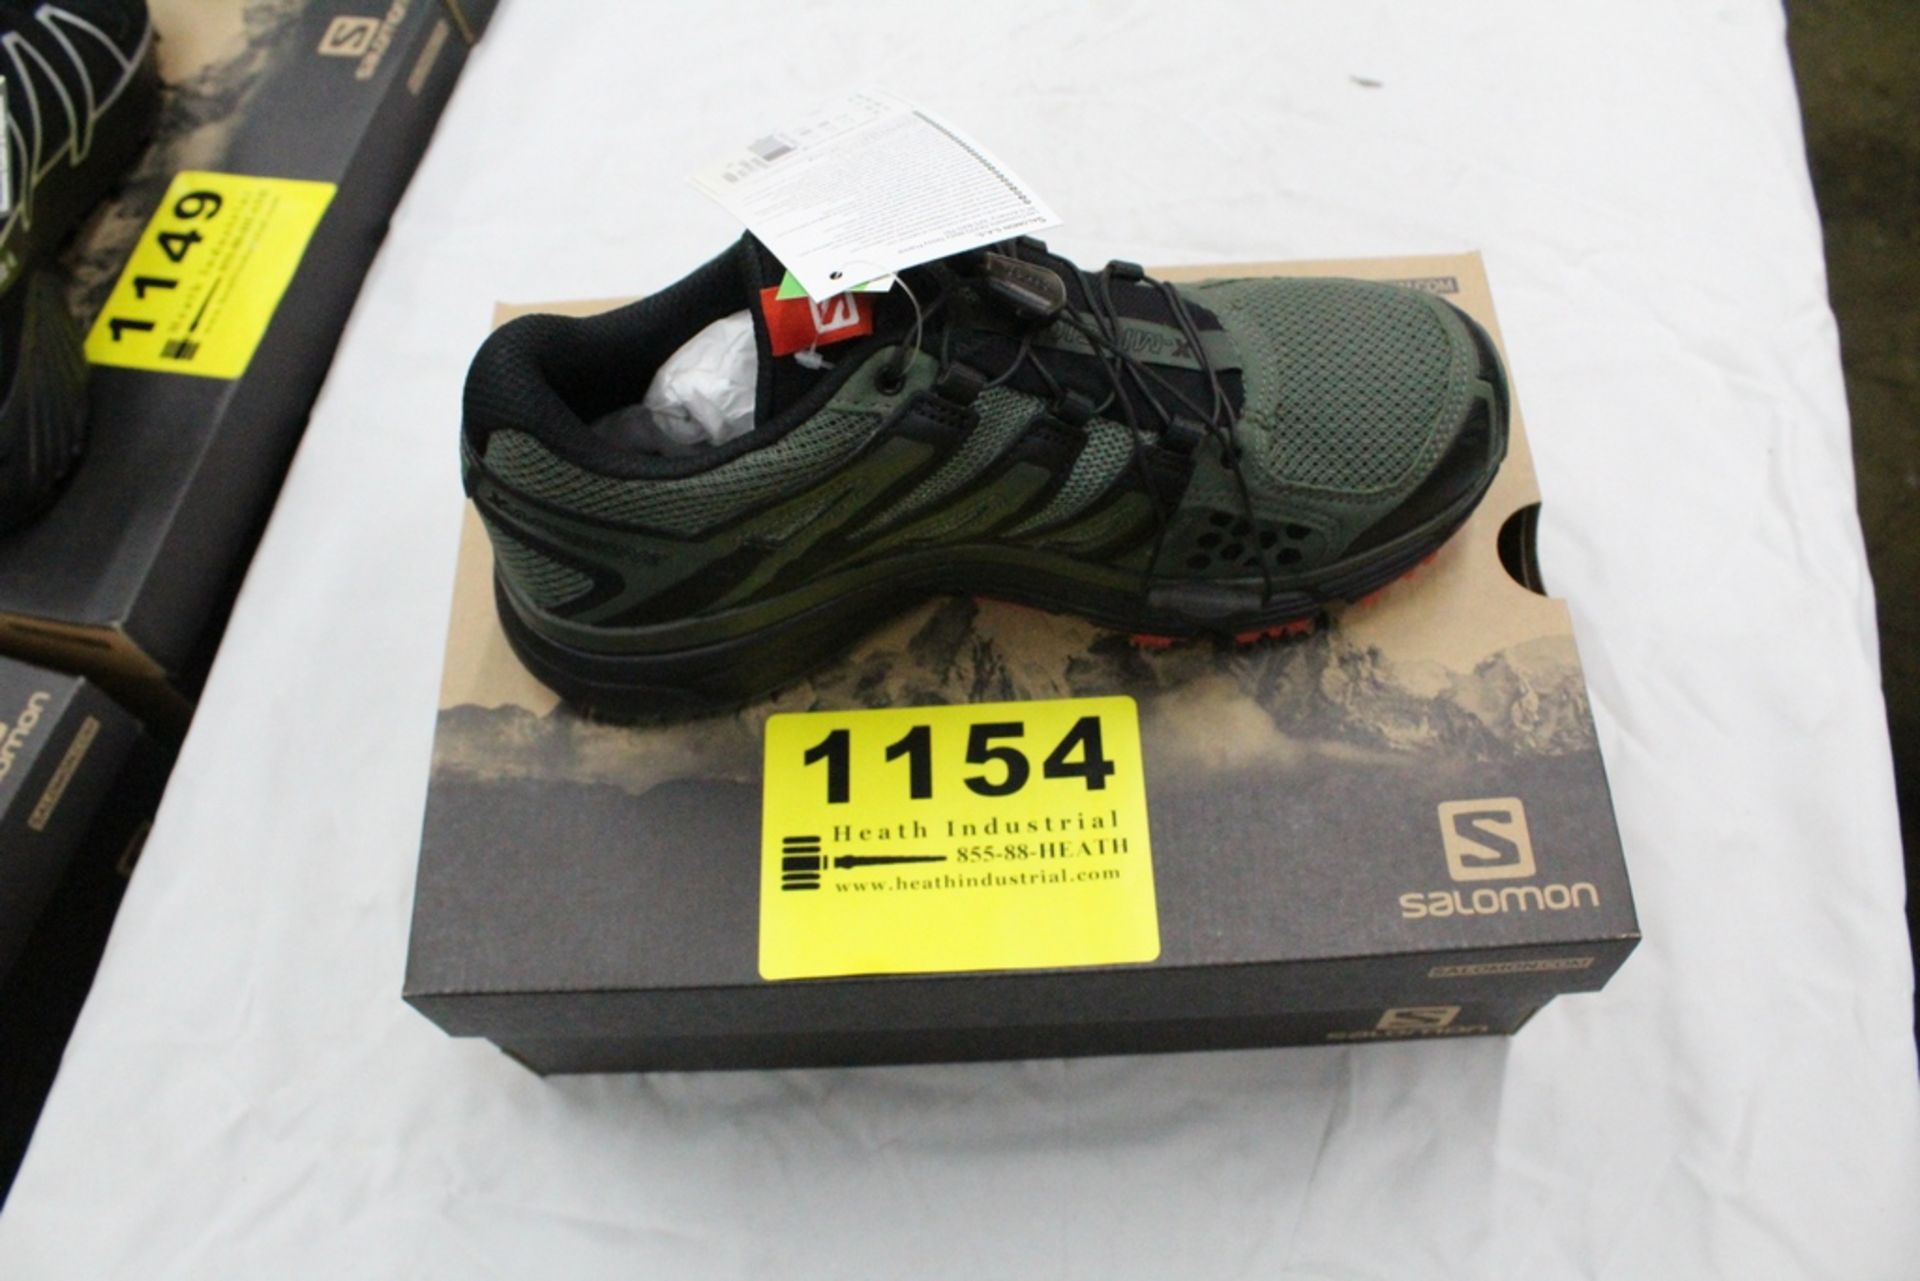 SALOMON X-MISSION RUNNING SHOES, SIZE 8